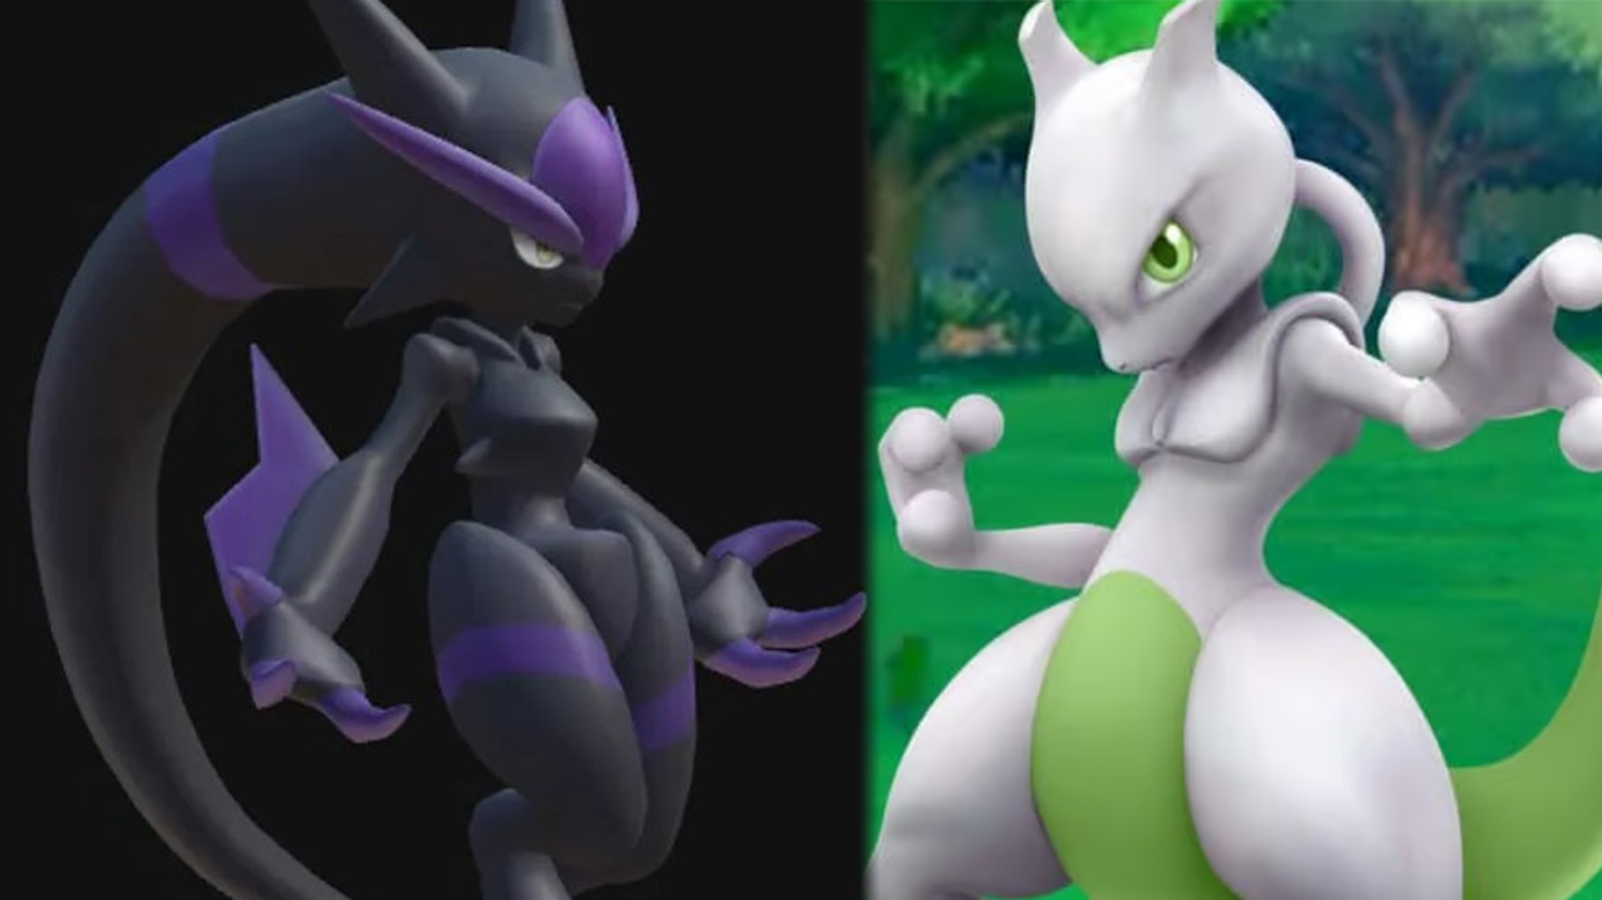 Palworld datamine reveals Pal who looks like Mewtwo as the Pokemon knockoff saga continues